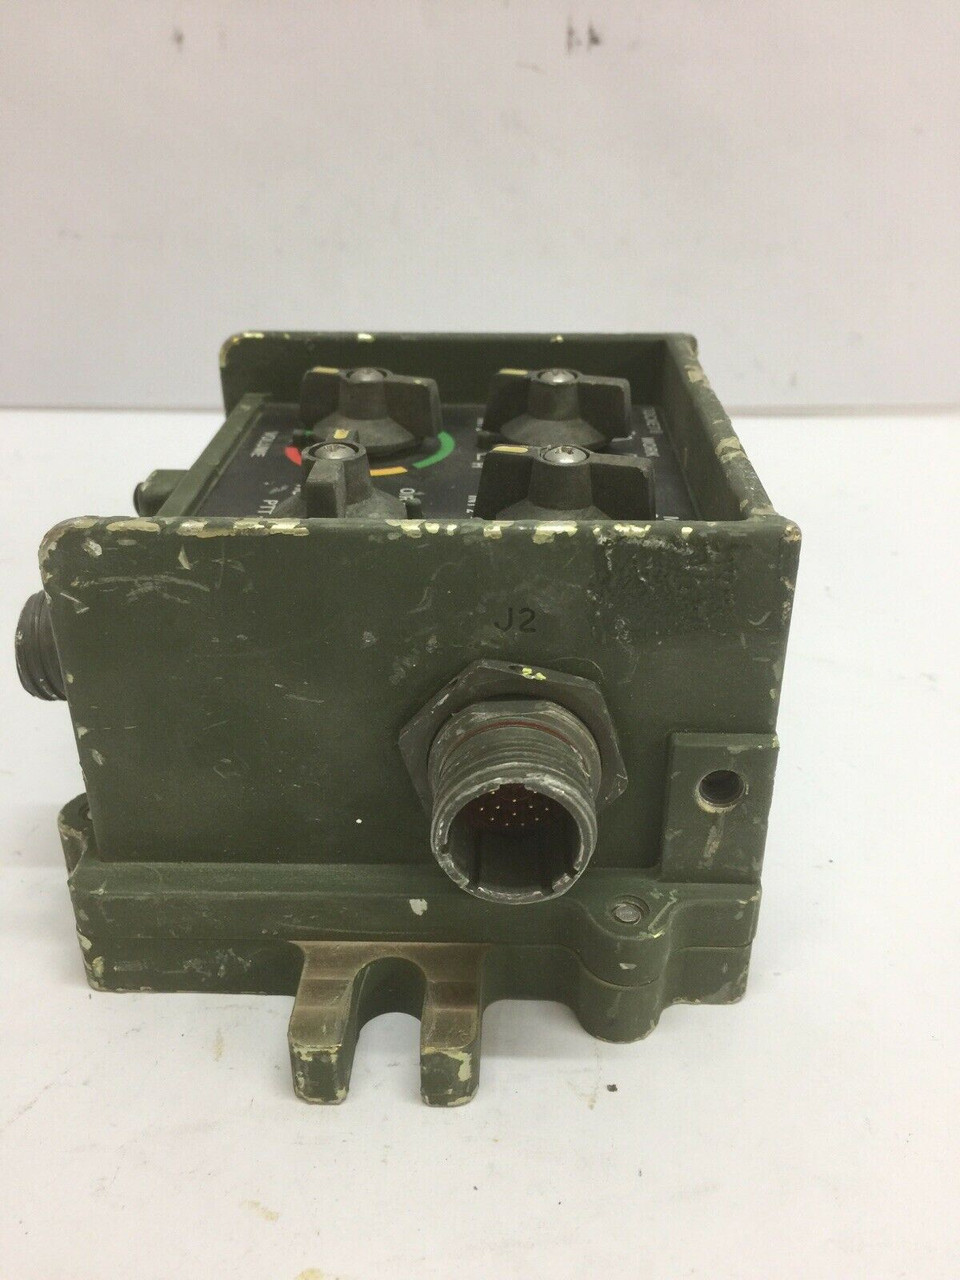 Electrical Control Panel 5483600-001 SCI Tocnet Radio Interface Hmmwv